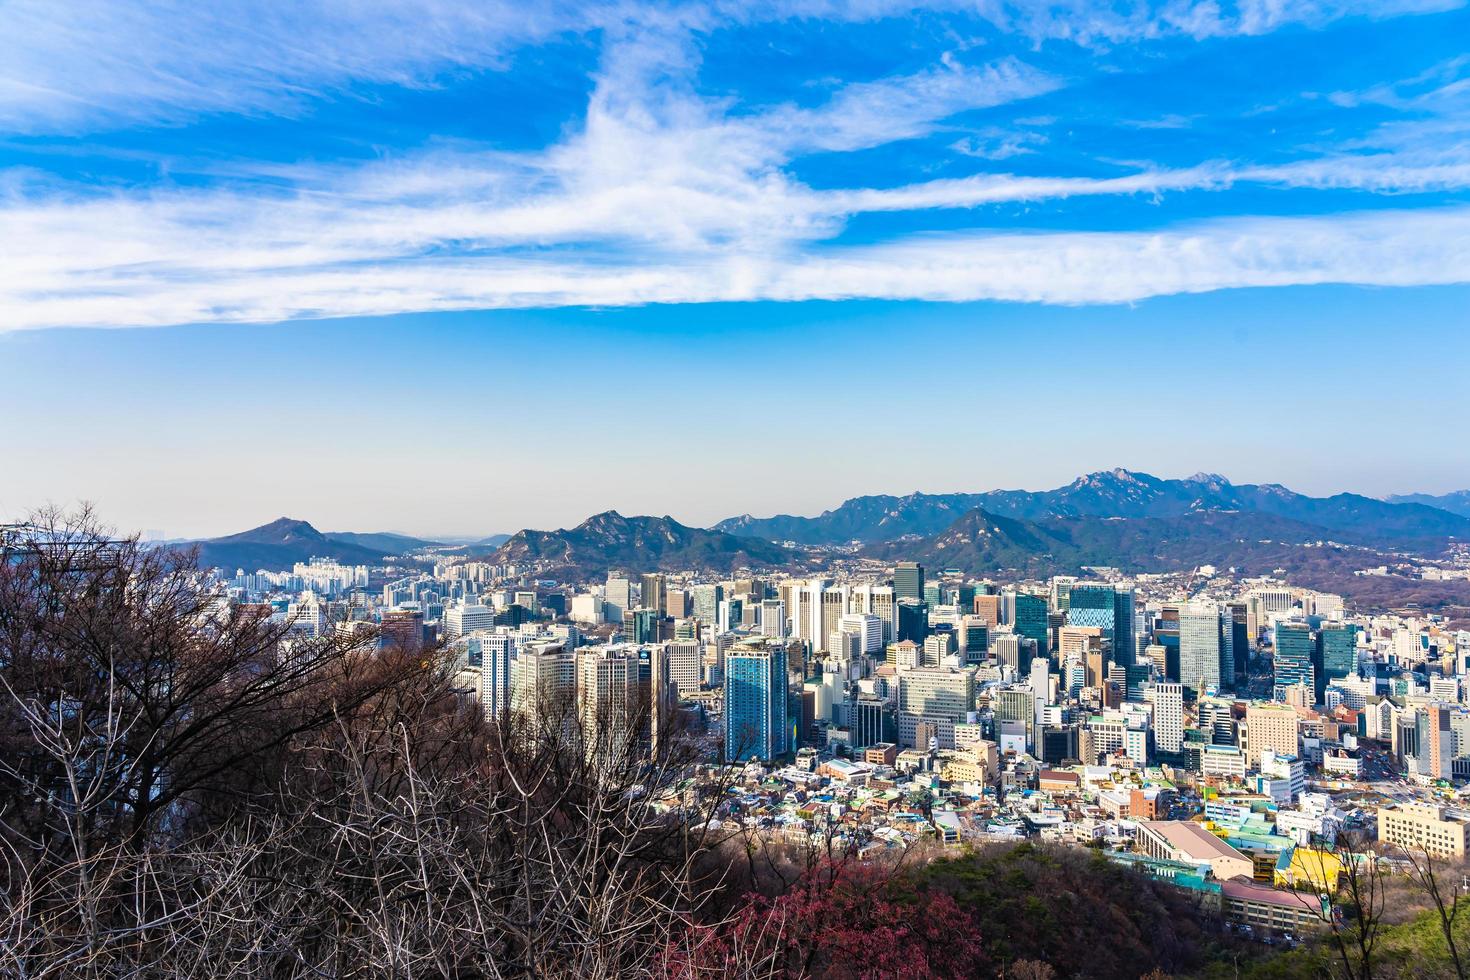 View of Seoul city, South Korea, at sunset photo